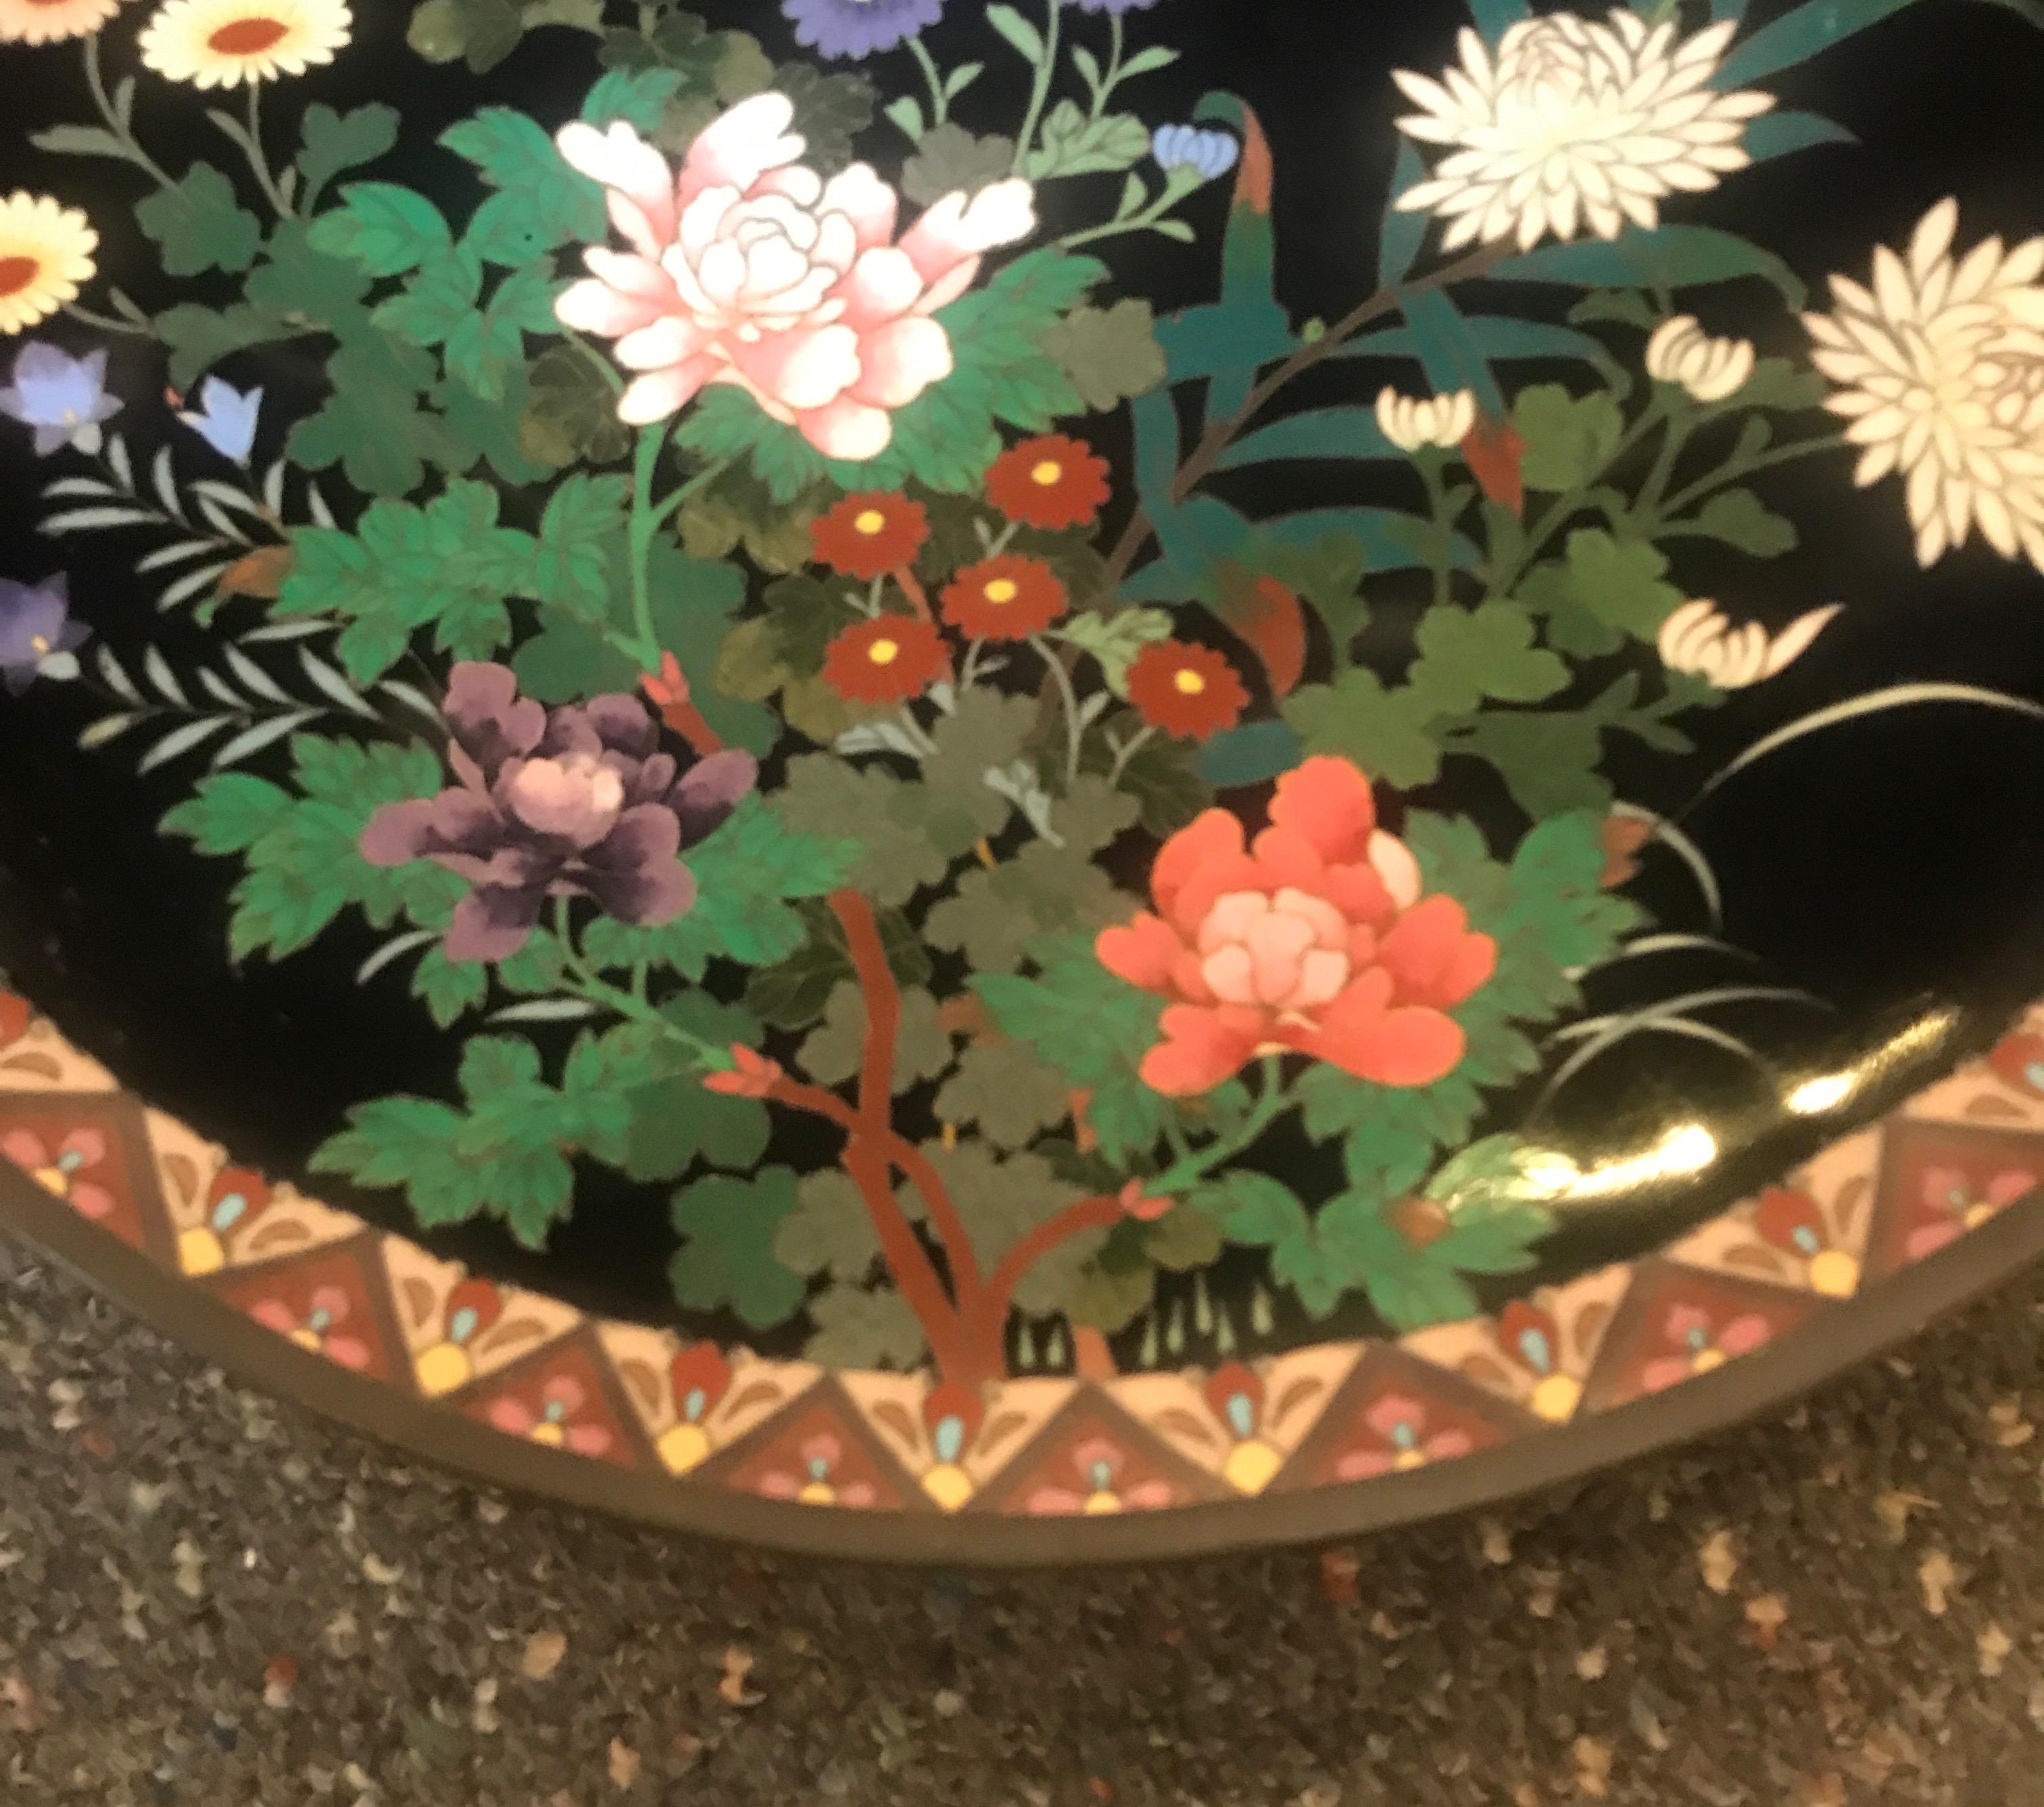 Enameled Meiji Period 19th Century Japanese Cloisonné Charger For Sale